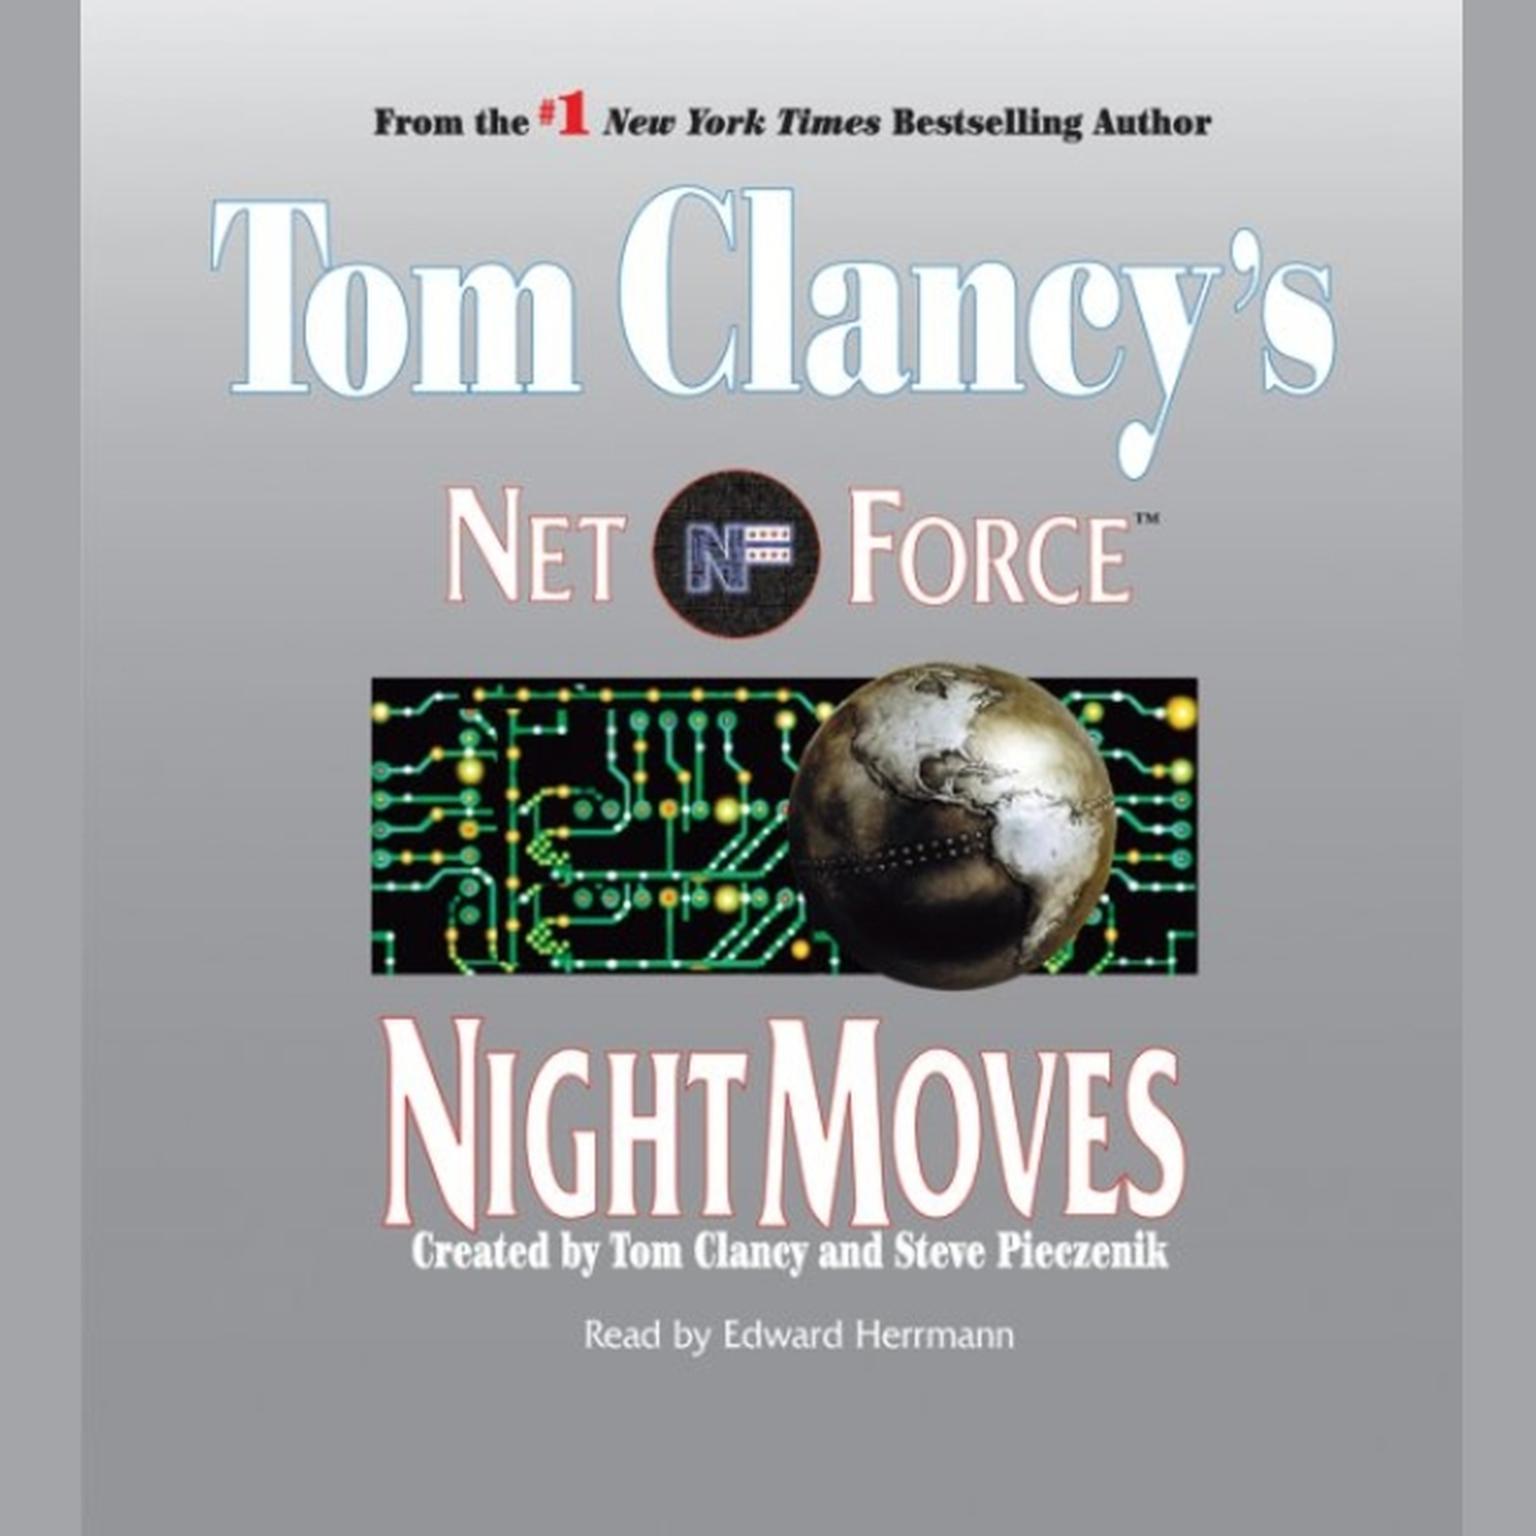 Tom Clancys Net Force #3: Night Moves (Abridged): Tom Clancy’s Net Force Audiobook, by Steve Perry